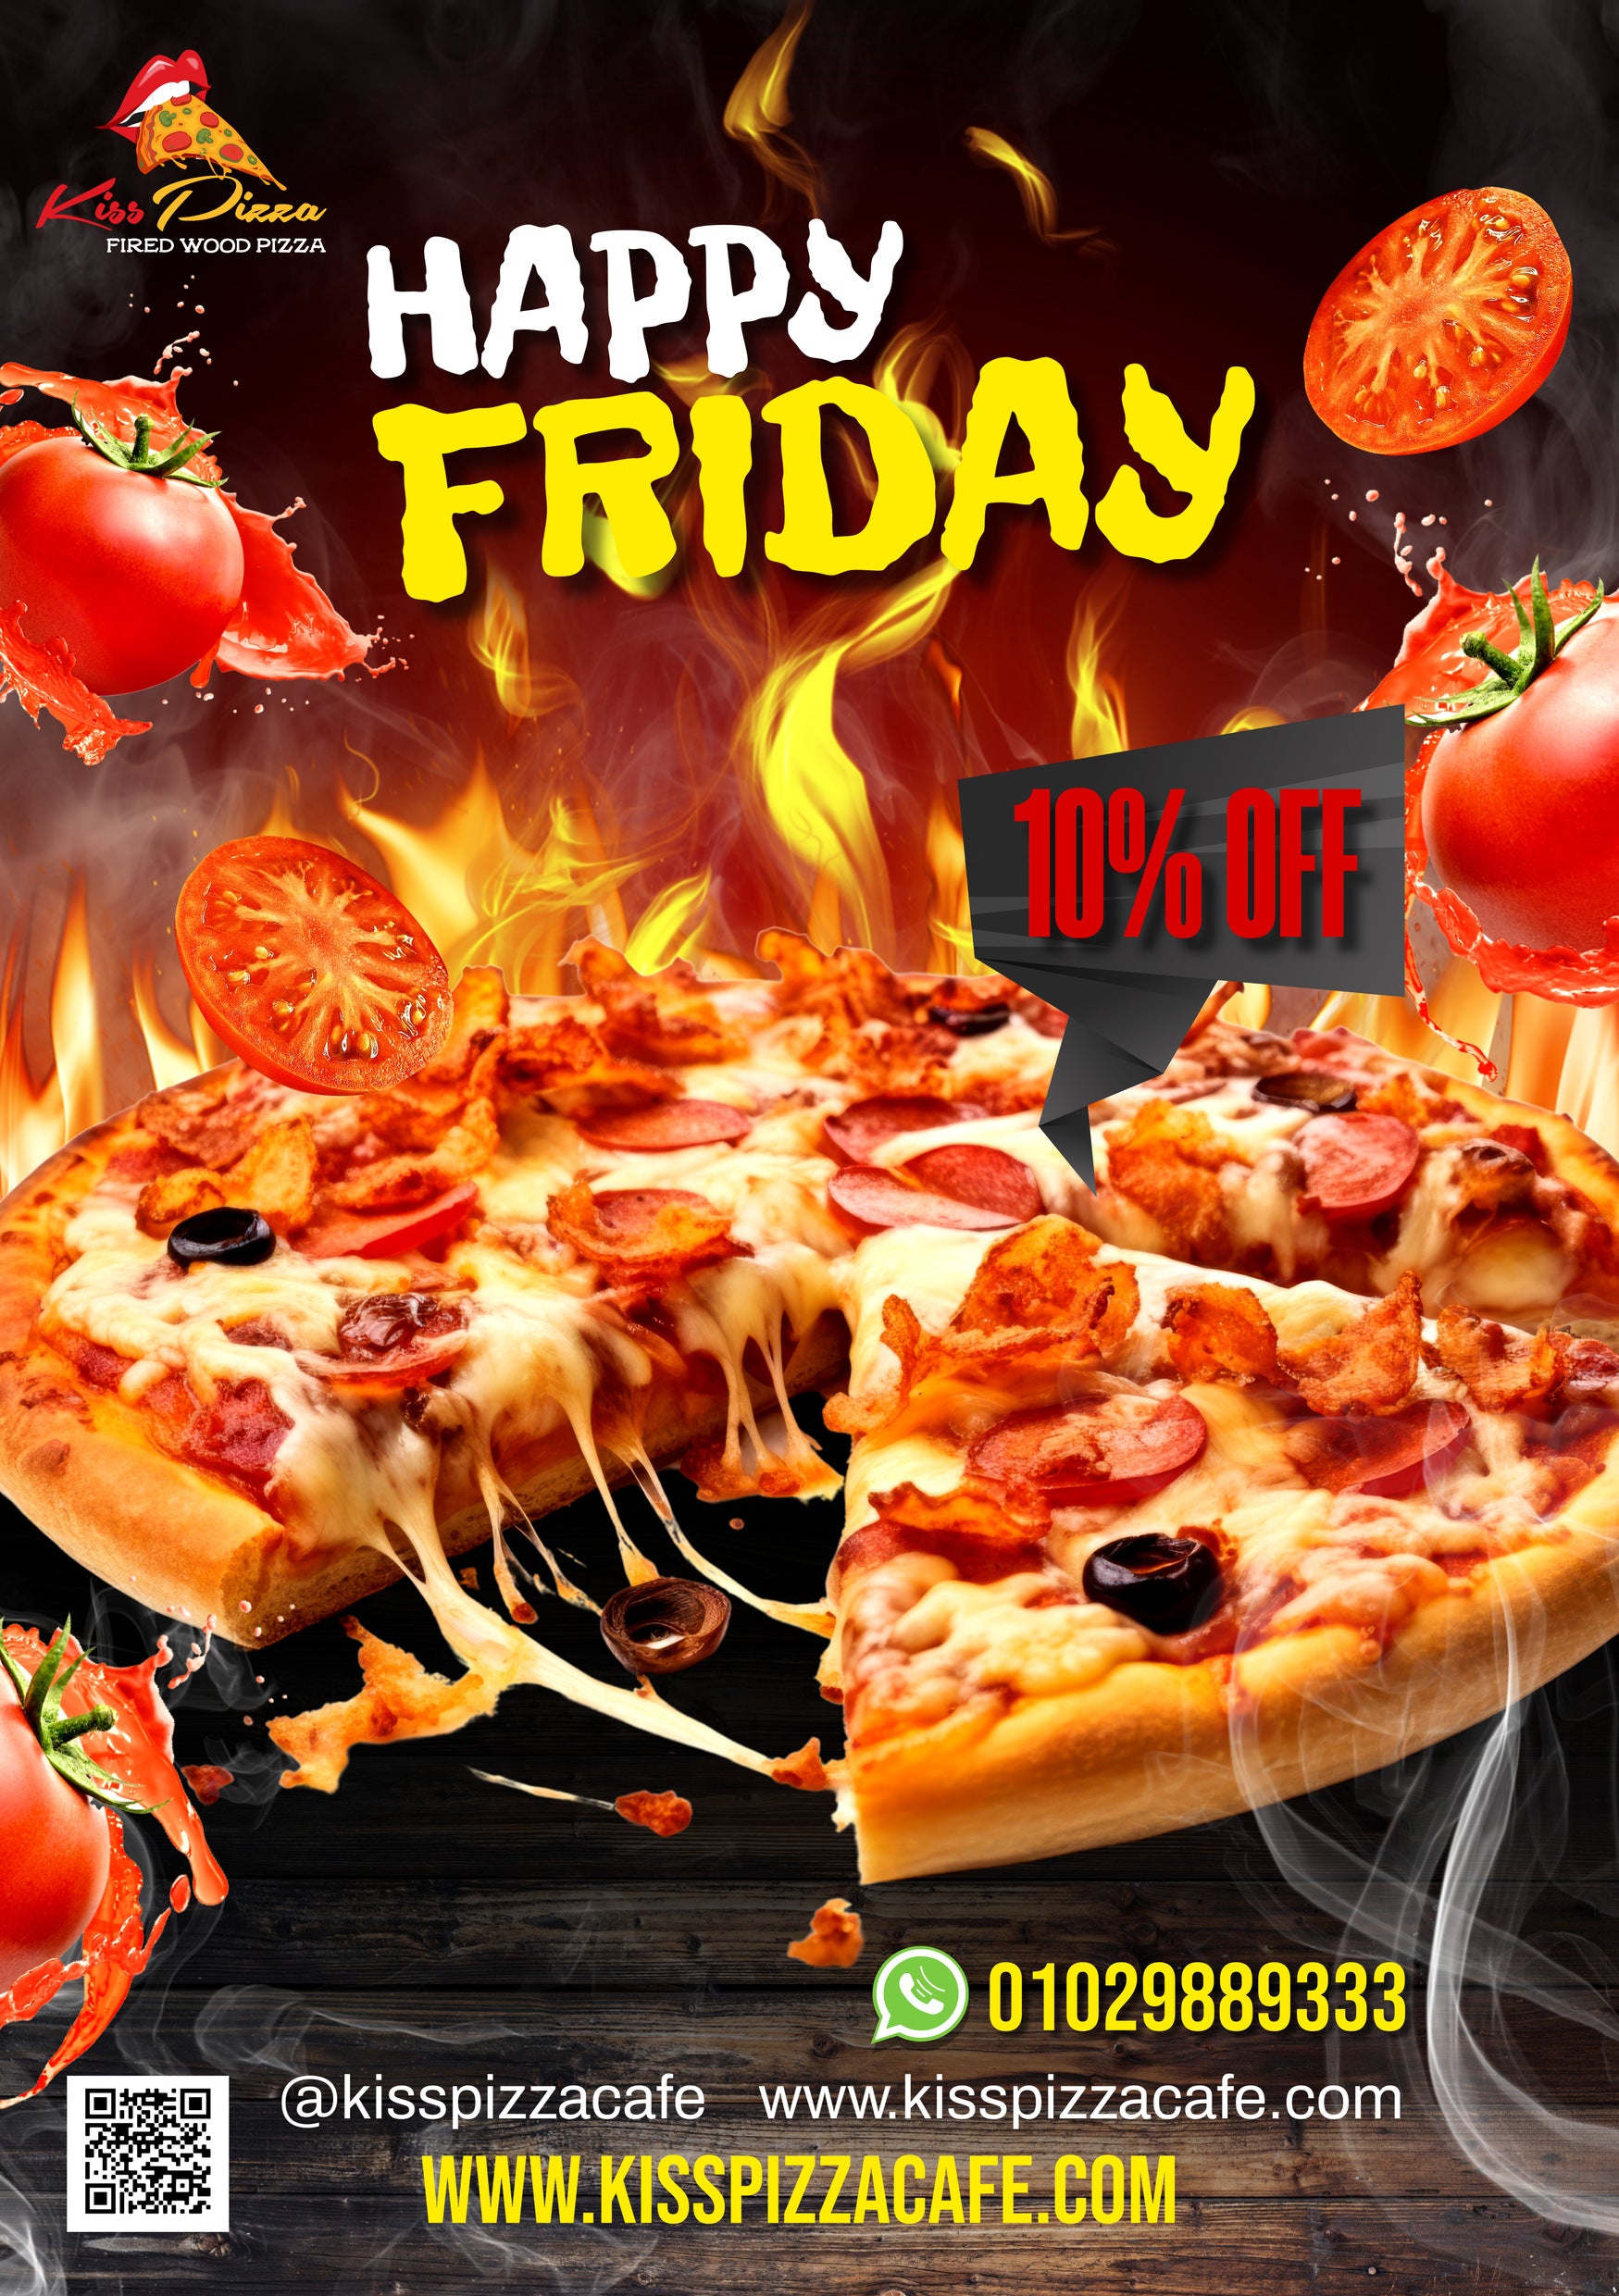 Kiss Pizza Friday Offer